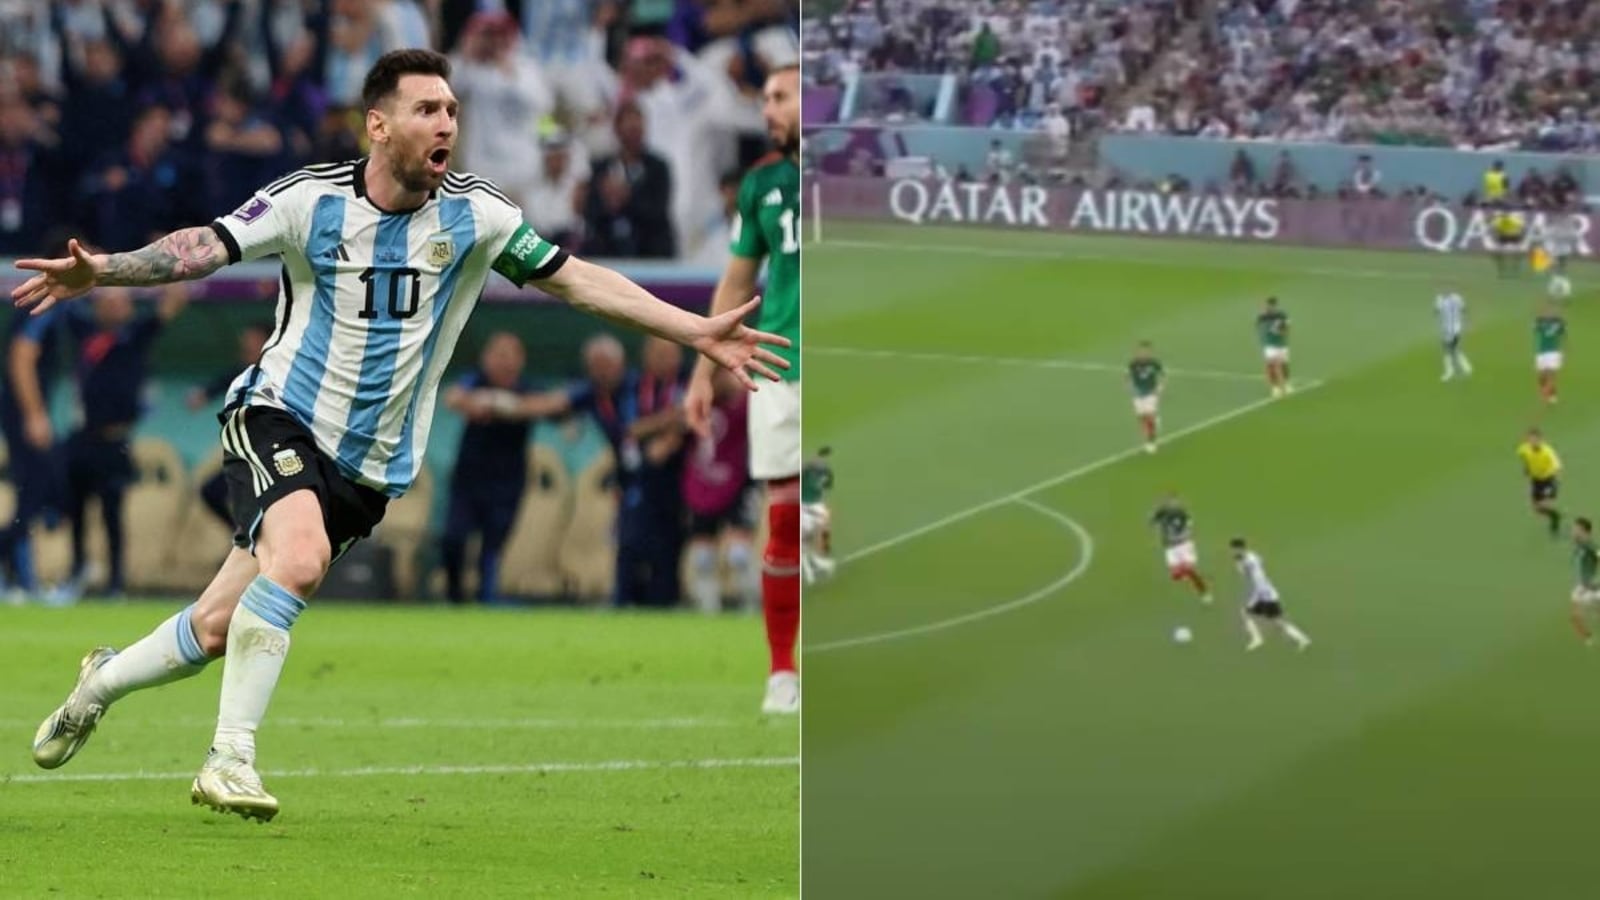 Watch Messi's thunderous goal that helped Argentina stay alive in